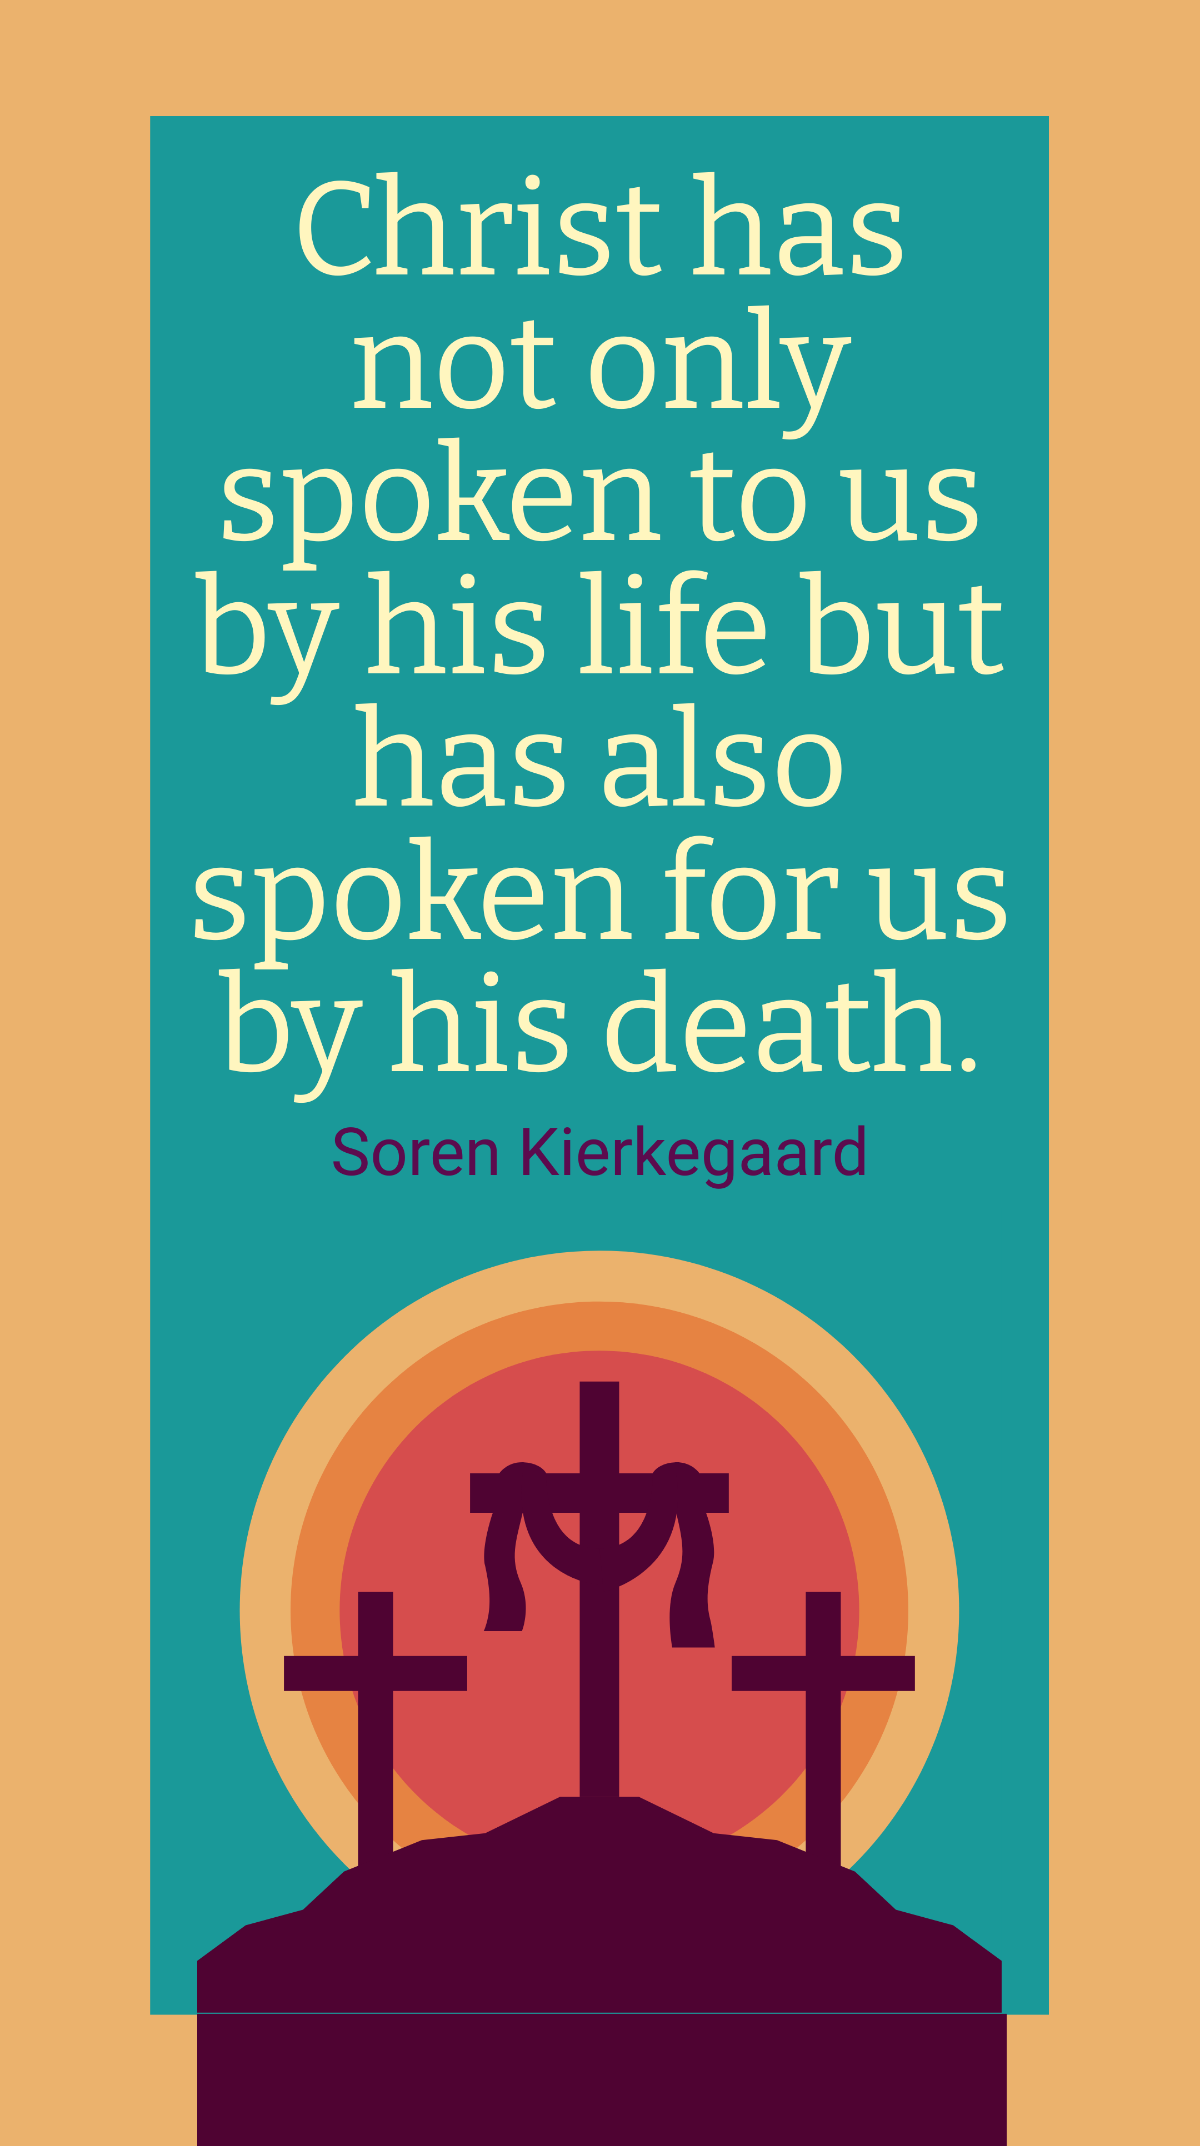 Soren Kierkegaard - Christ has not only spoken to us by his life but has also spoken for us by his death. Template